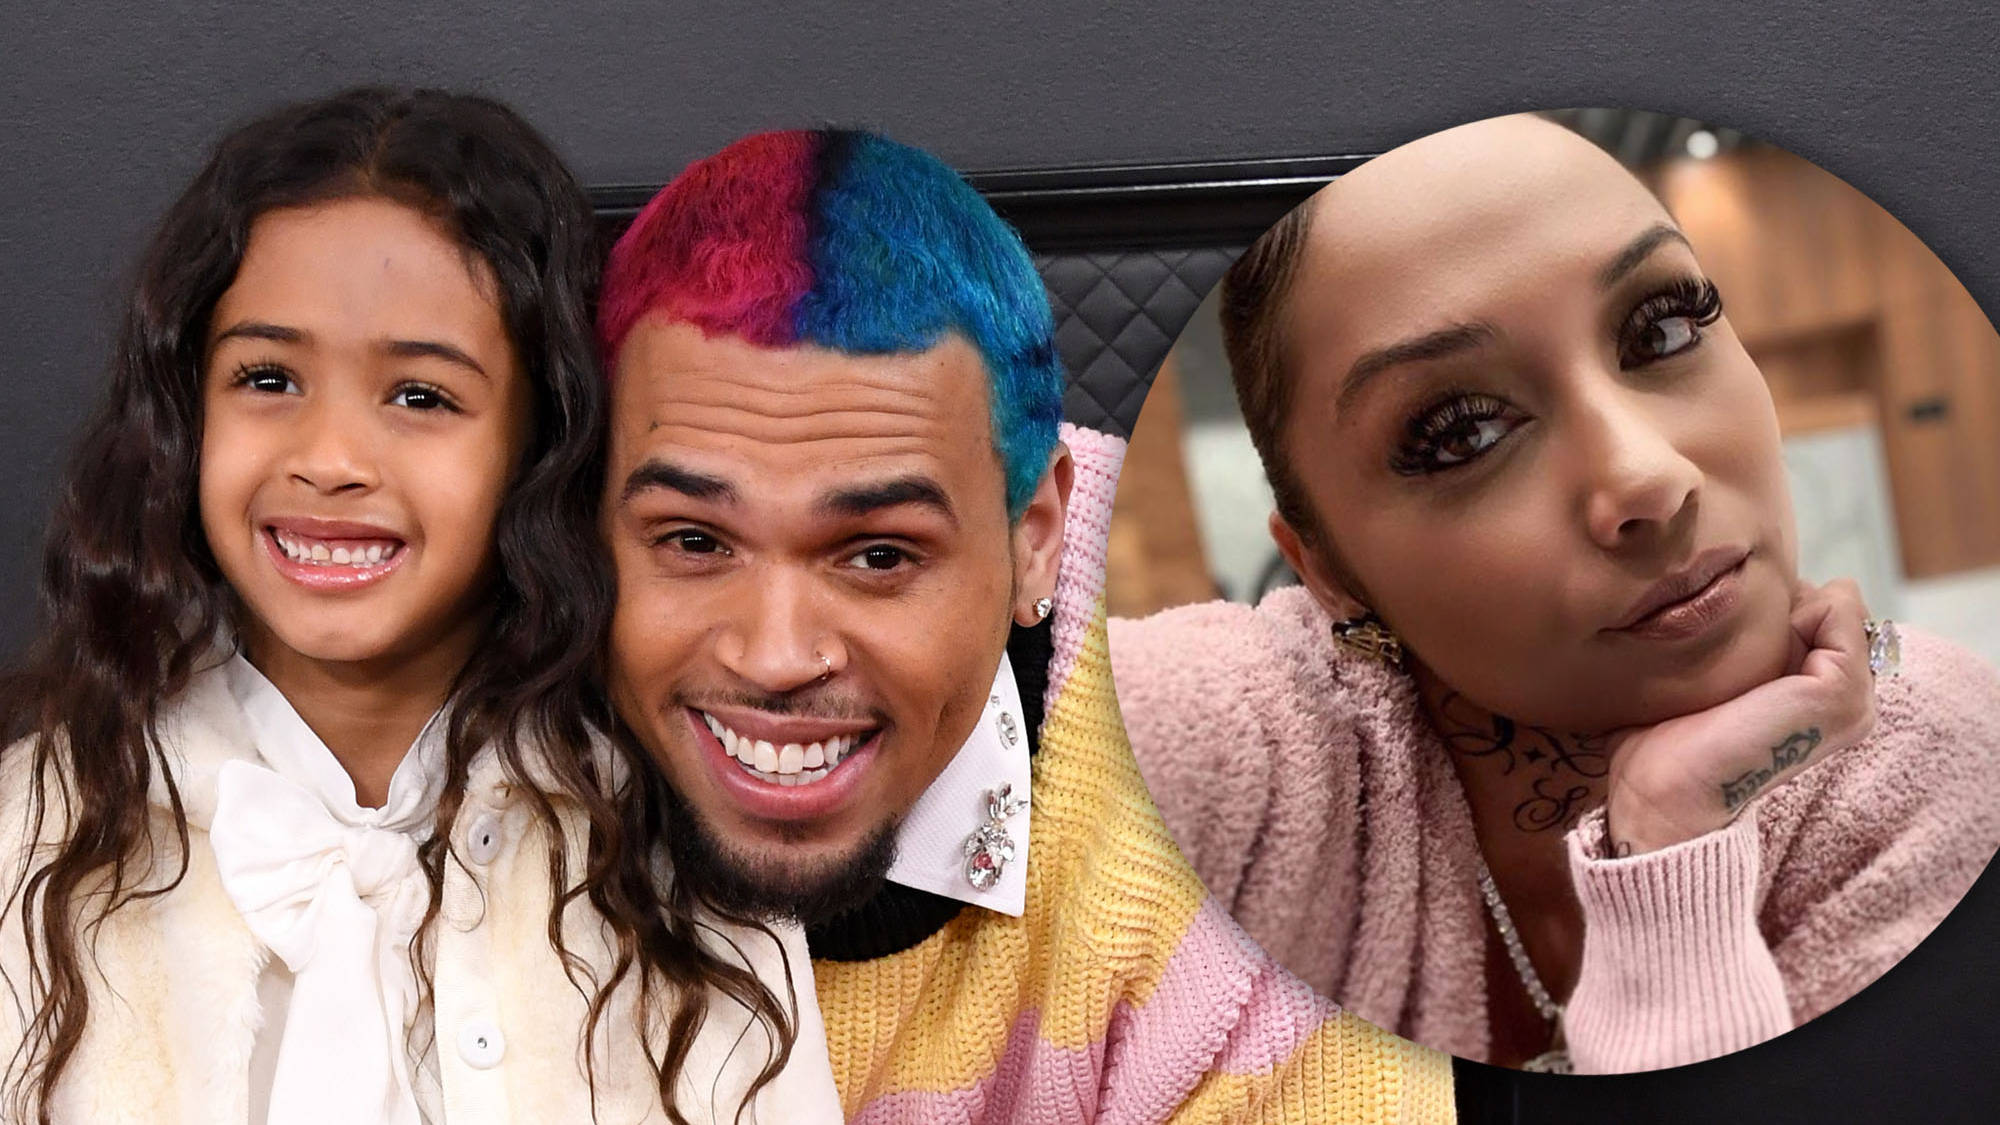 Chris Brown Daughter Royalty Models modeling skills while wearing a white jacket and mini-skirt in photos!